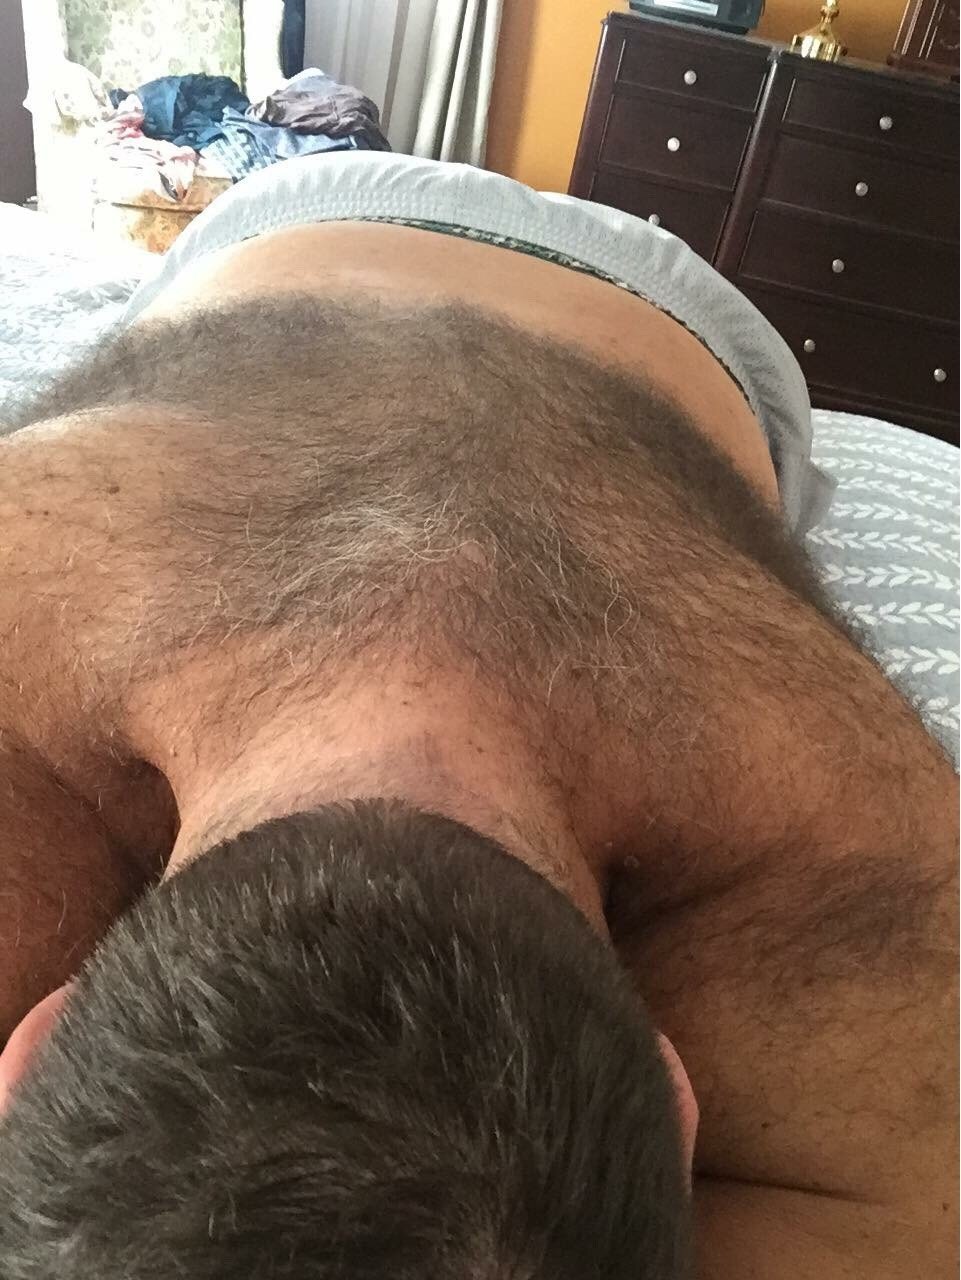 Photo by Smitty with the username @Resol702,  August 27, 2019 at 5:07 PM. The post is about the topic Gay Hairy Men